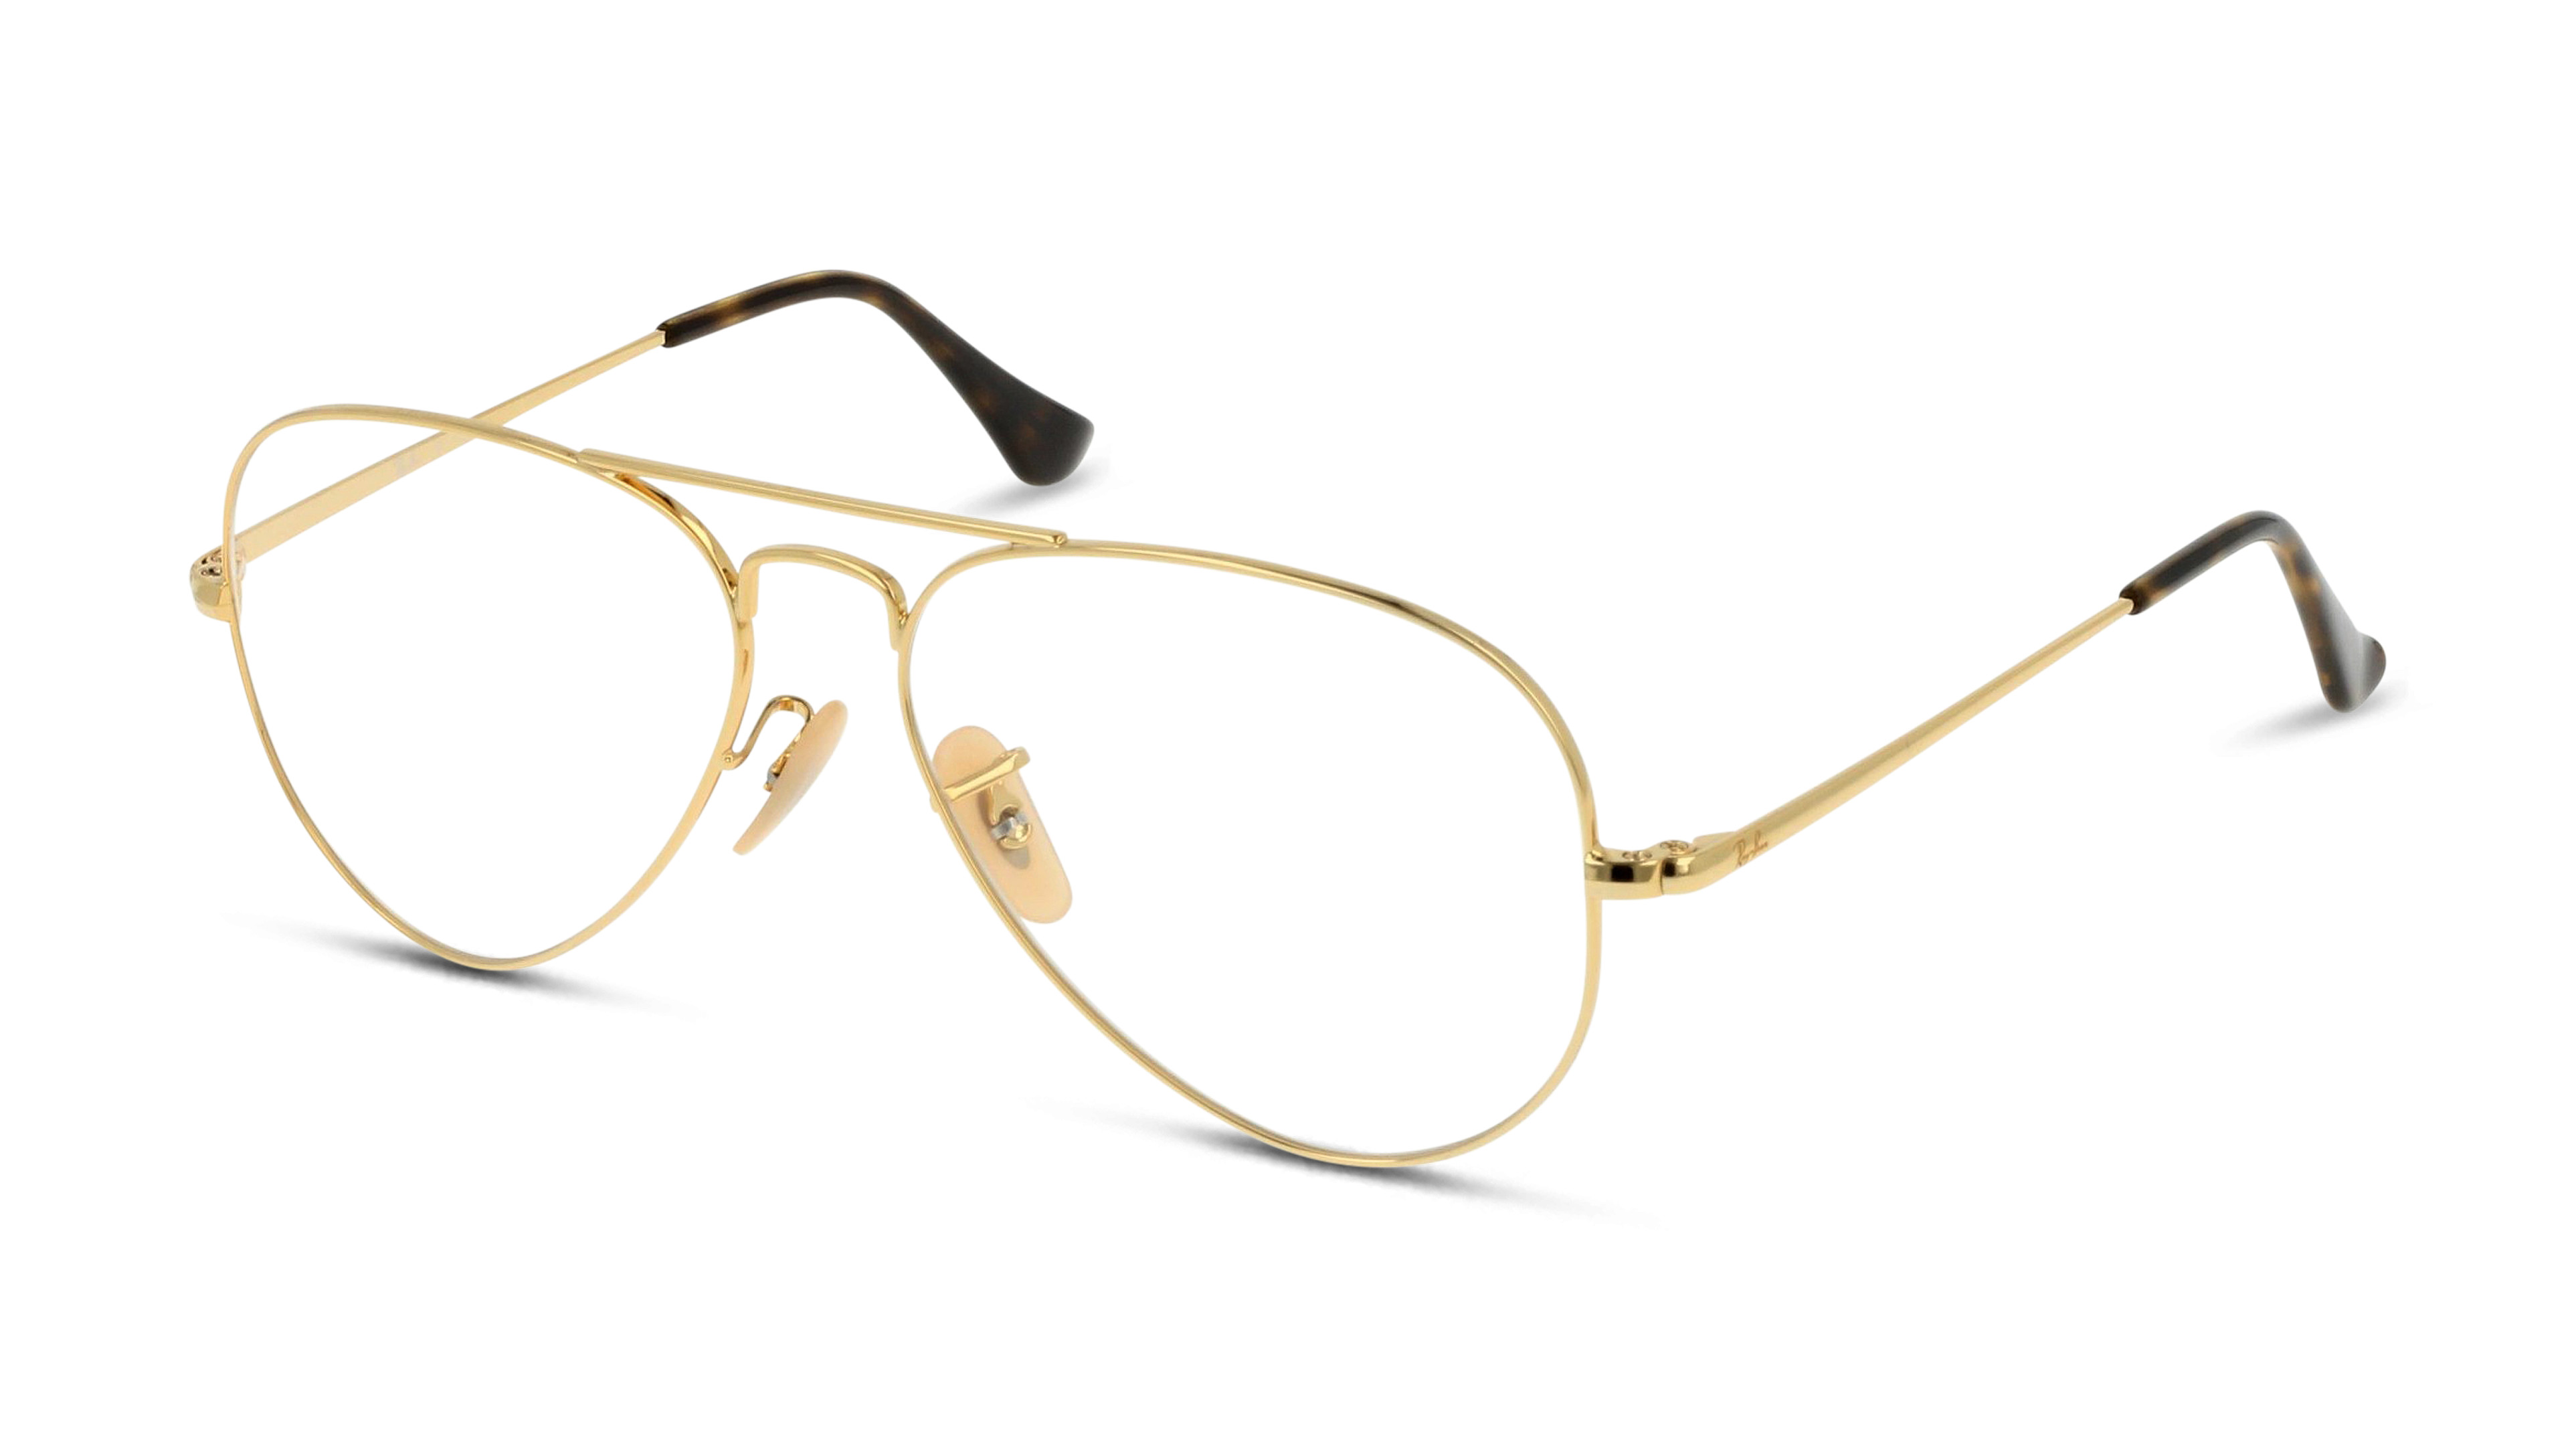 Angle_Left01 Ray-Ban AVIATOR 0RX6489 2500 Brille Goldfarben